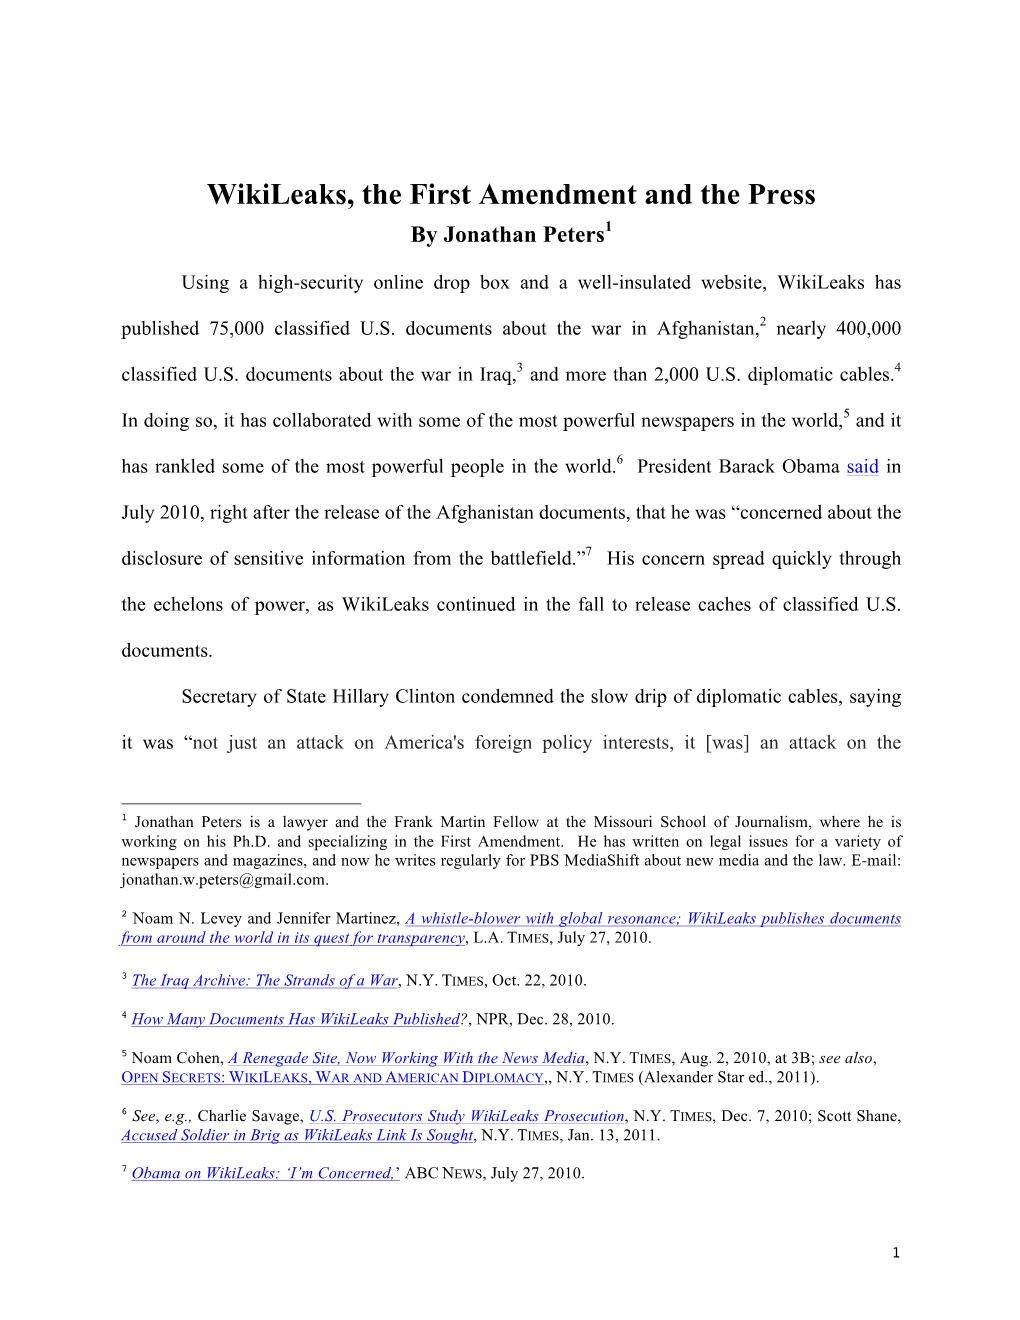 Wikileaks, the First Amendment and the Press by Jonathan Peters1